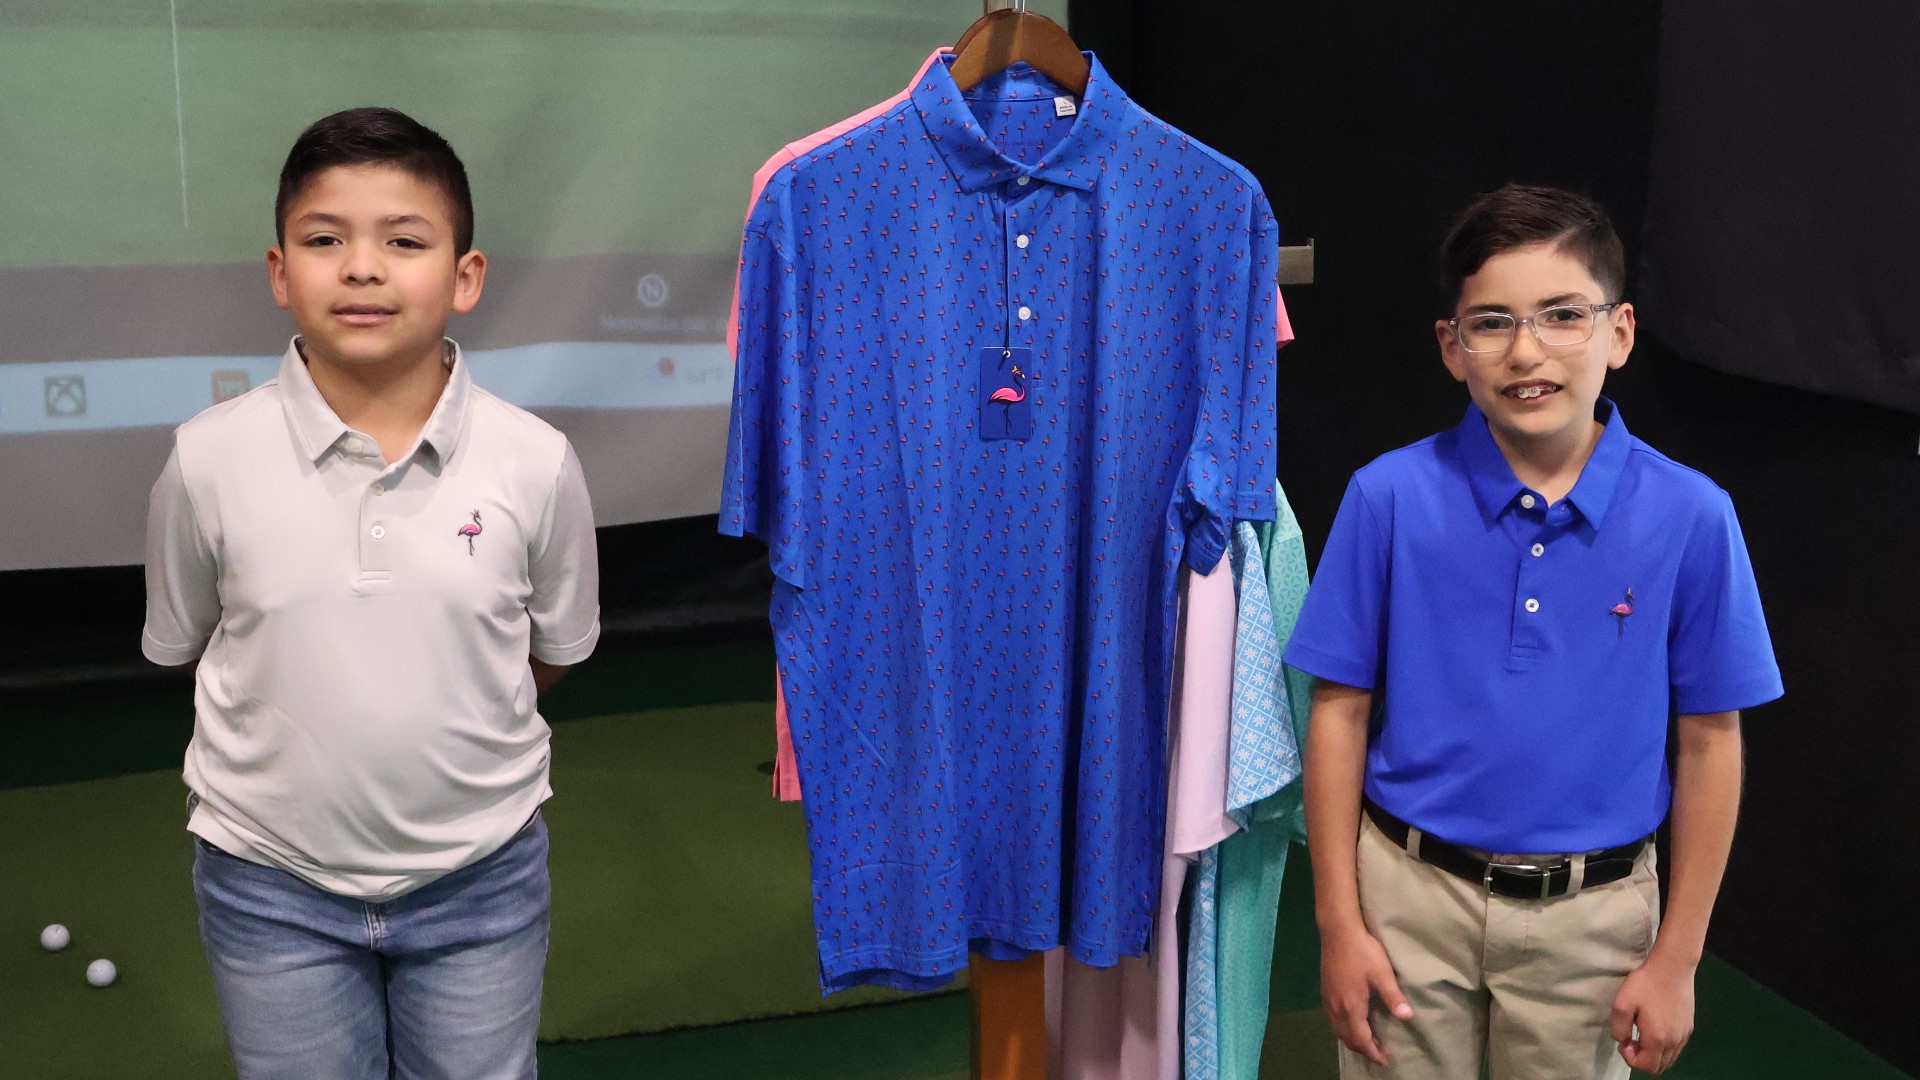 Eligible kids are gifted free golf equipment and apparel. Members can also participate in clinics and lessons at a discounted rate.